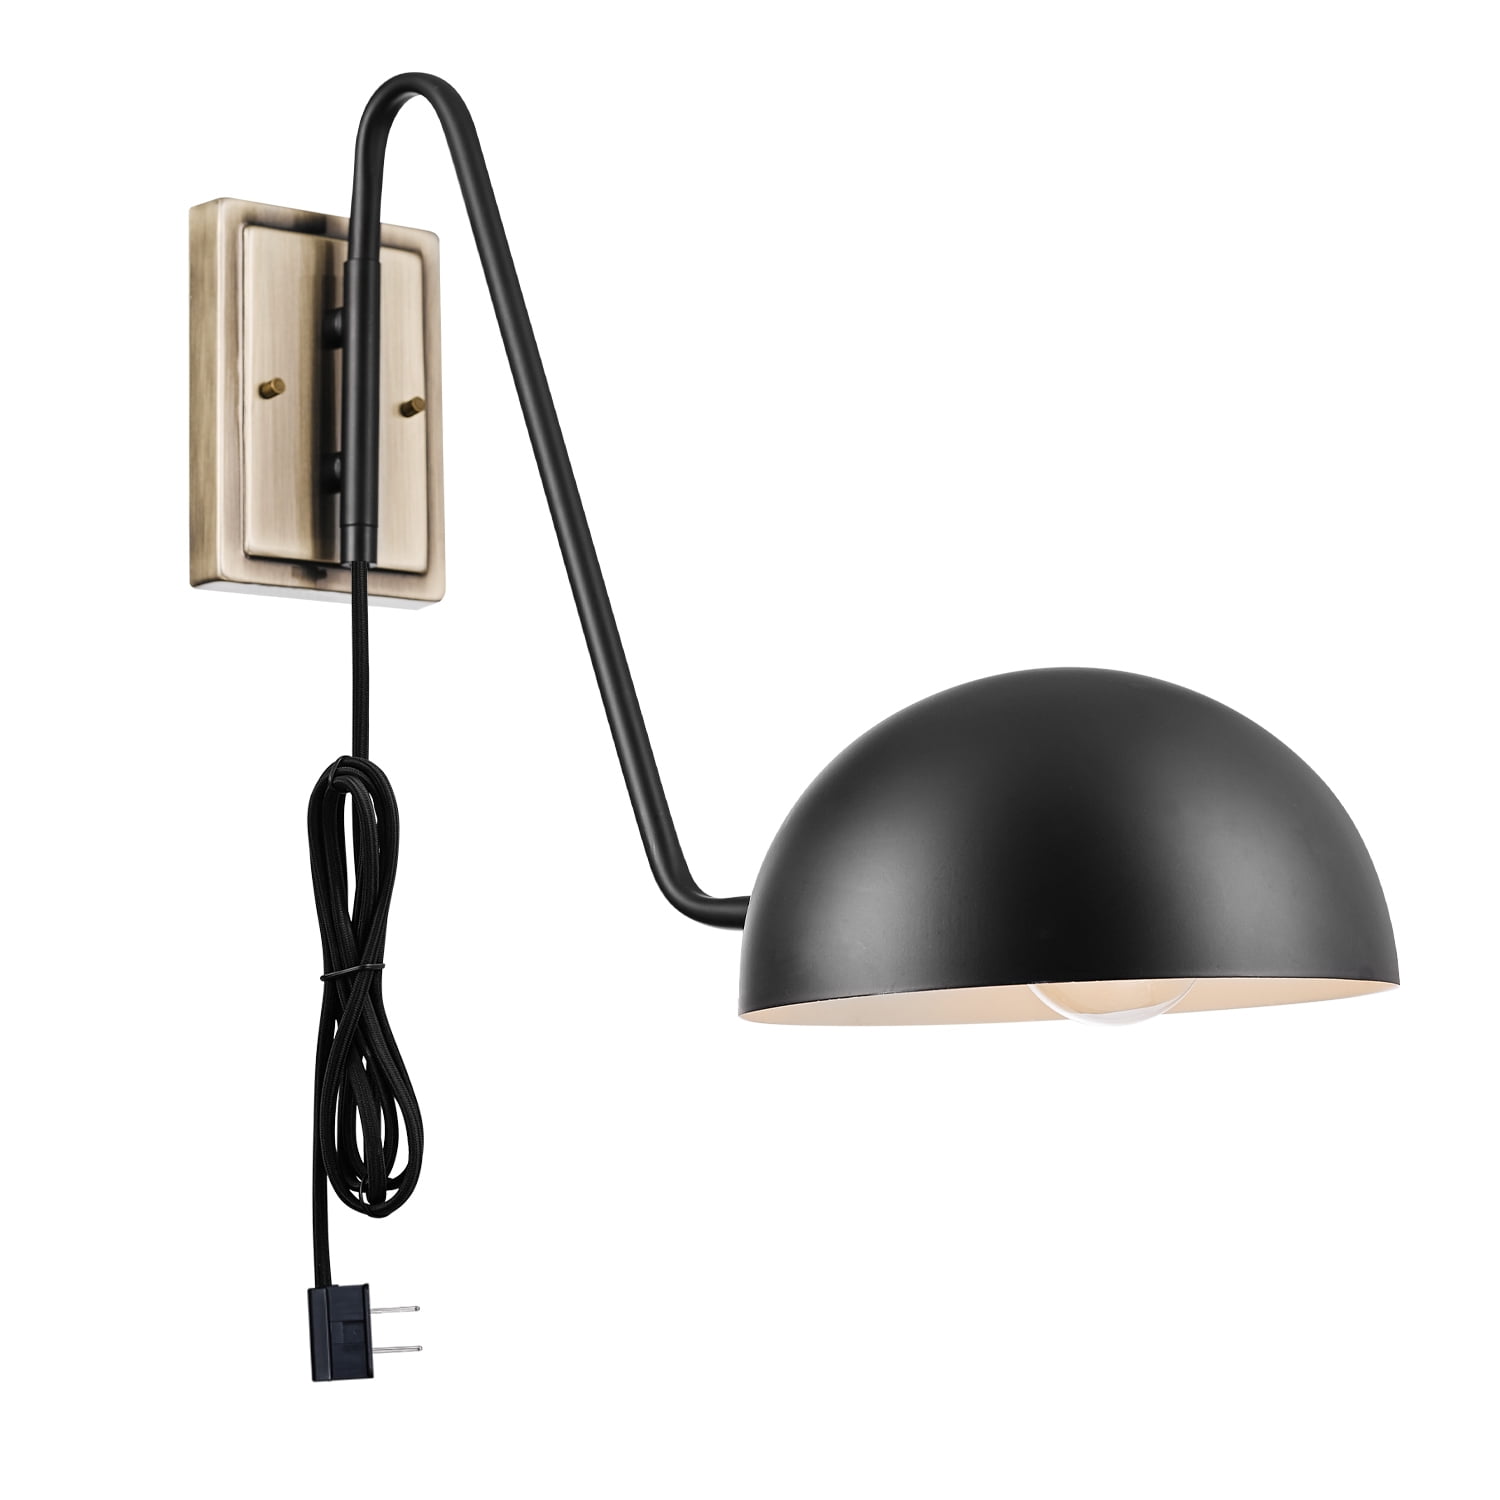 Black Wall-Mount Sconce Light Task Lamp Hardwire Plug-In Reading 6Ft Clear Cord 